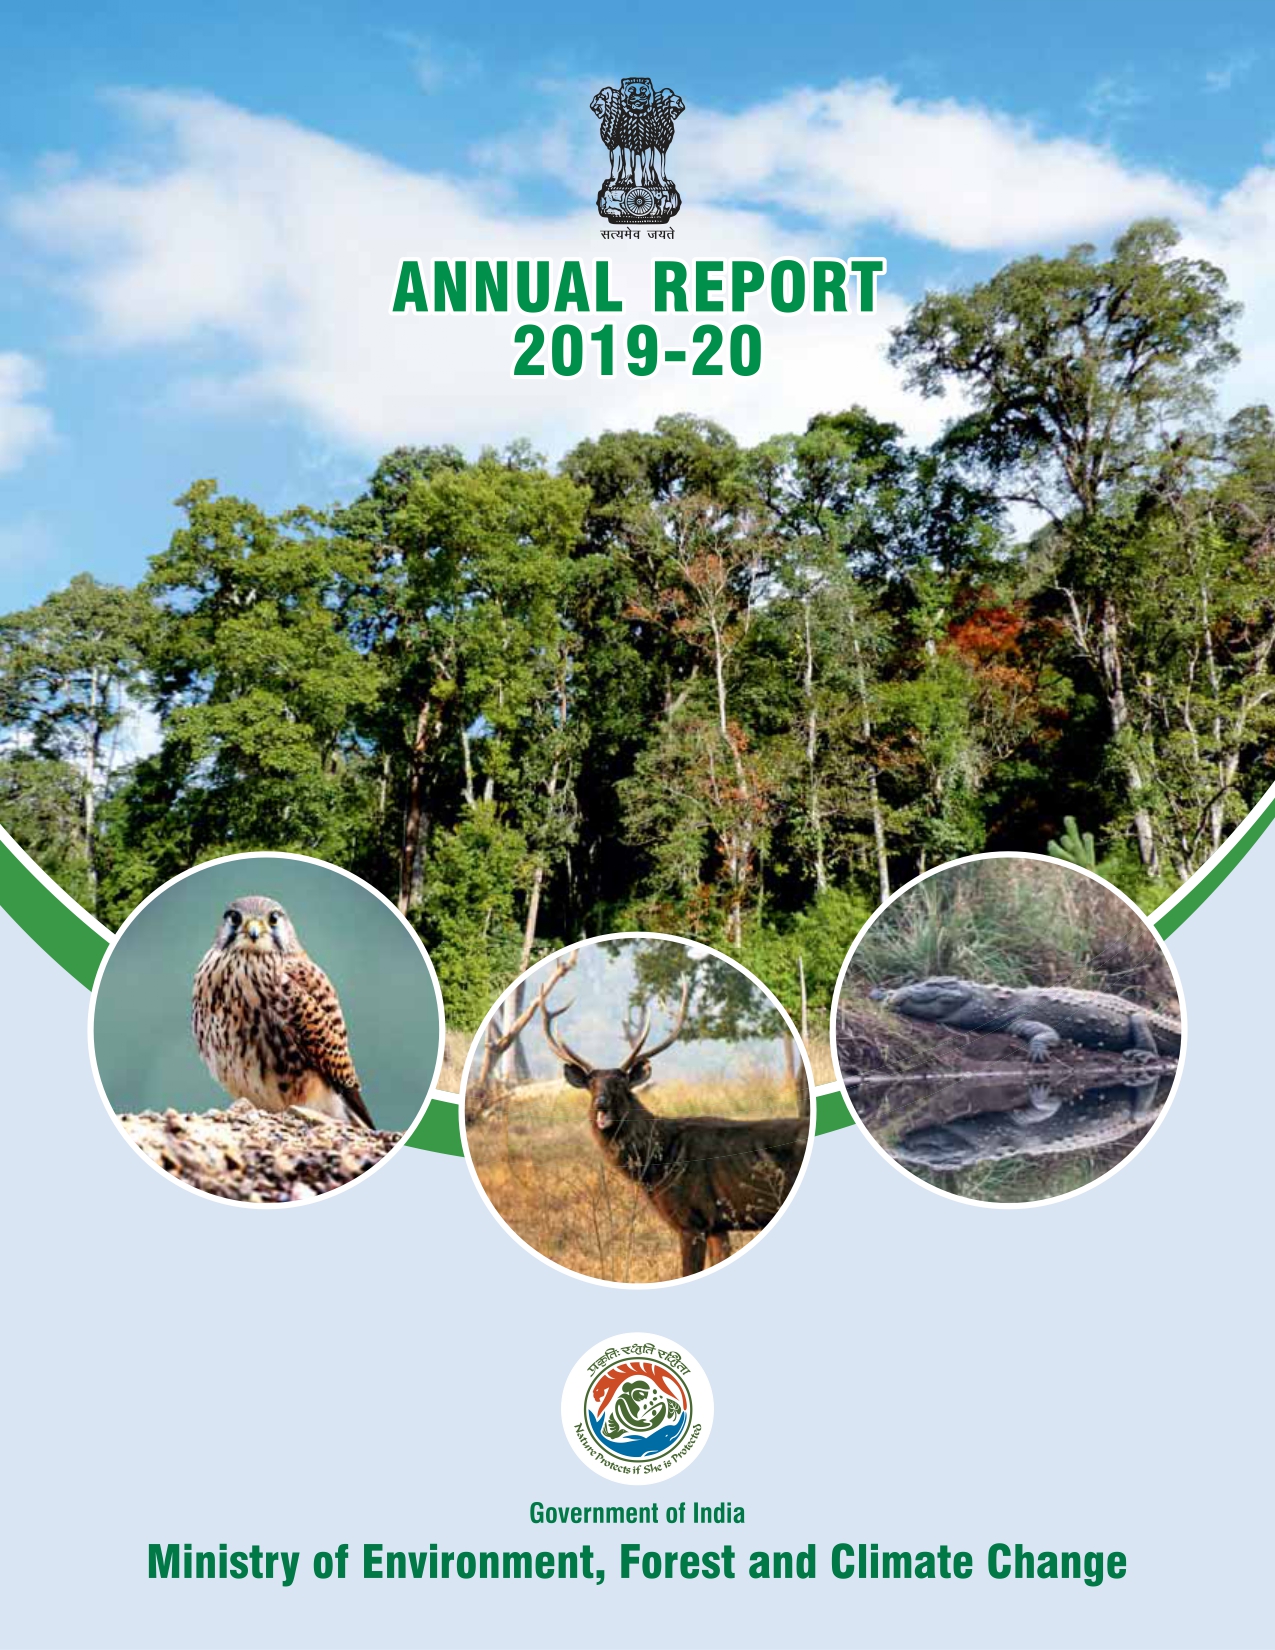 Image of Annual Report 2019-2020